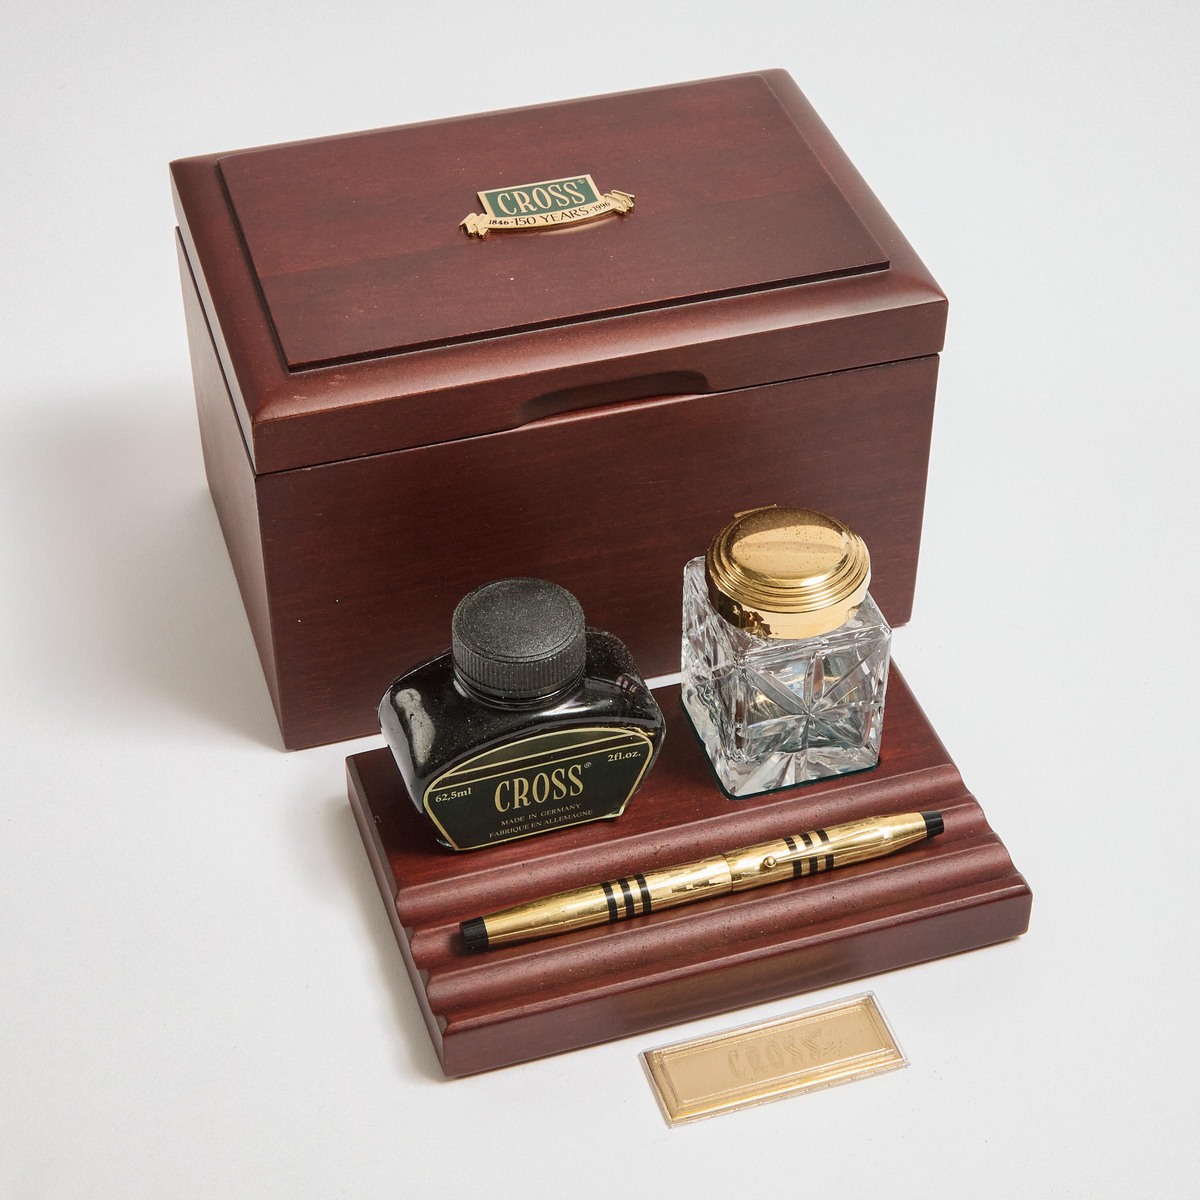 Cross 150th Anniversary Fountain Pen, #0881 of 2750; gold-plated and resin body with an 18k yellow g